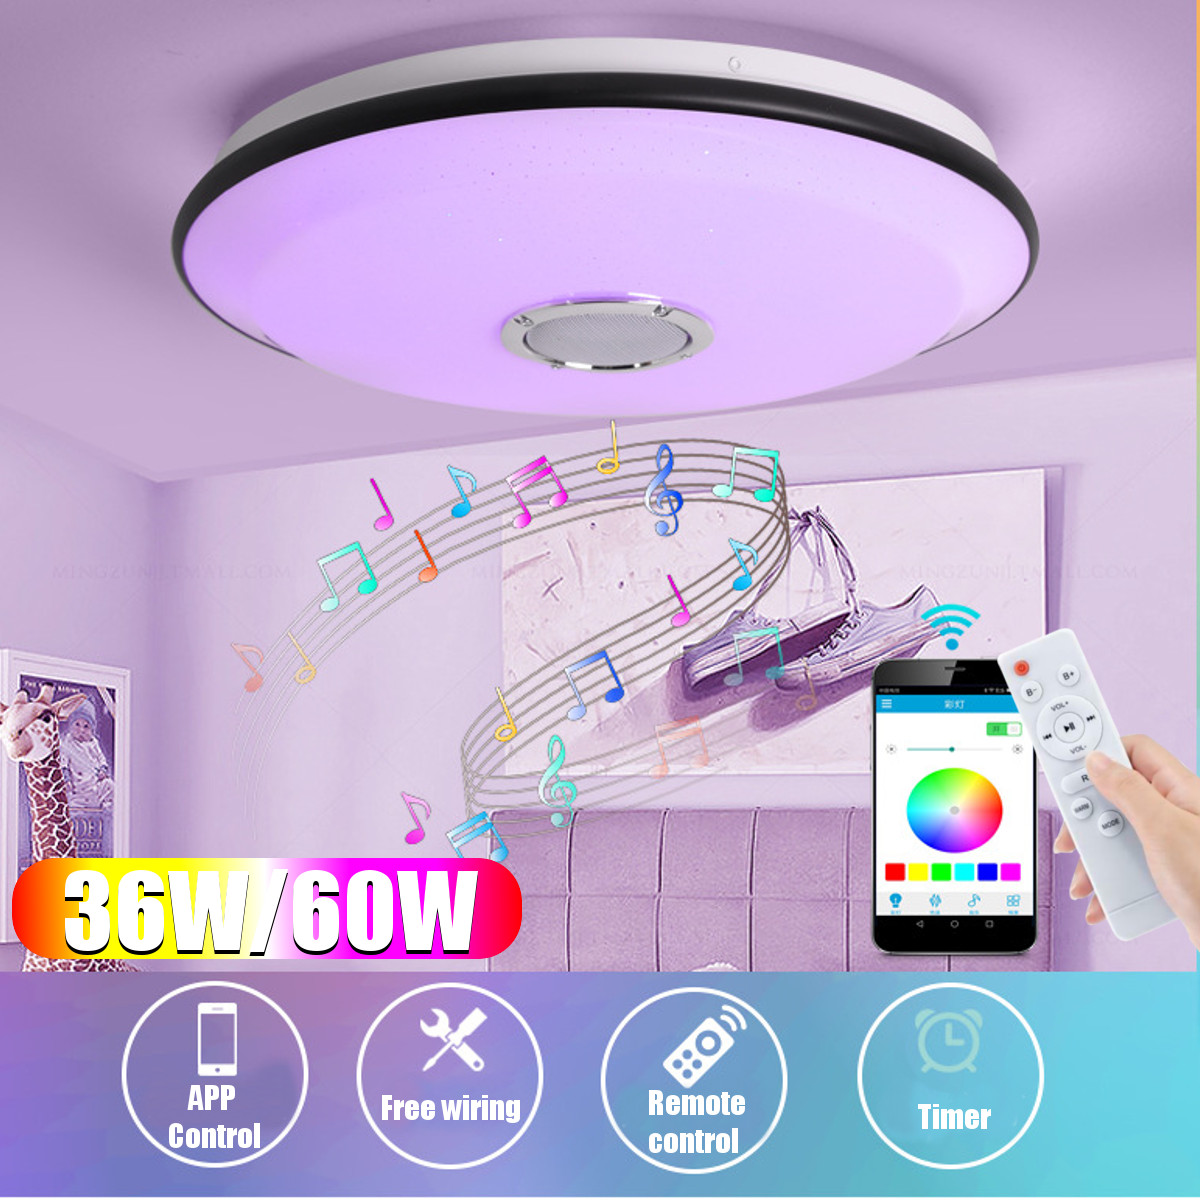 36-60W-LED-RGB-Music-Ceiling-Lamp-bluetooth-APPRemote-Control-Home-Bedroom-Lights-1697181-1